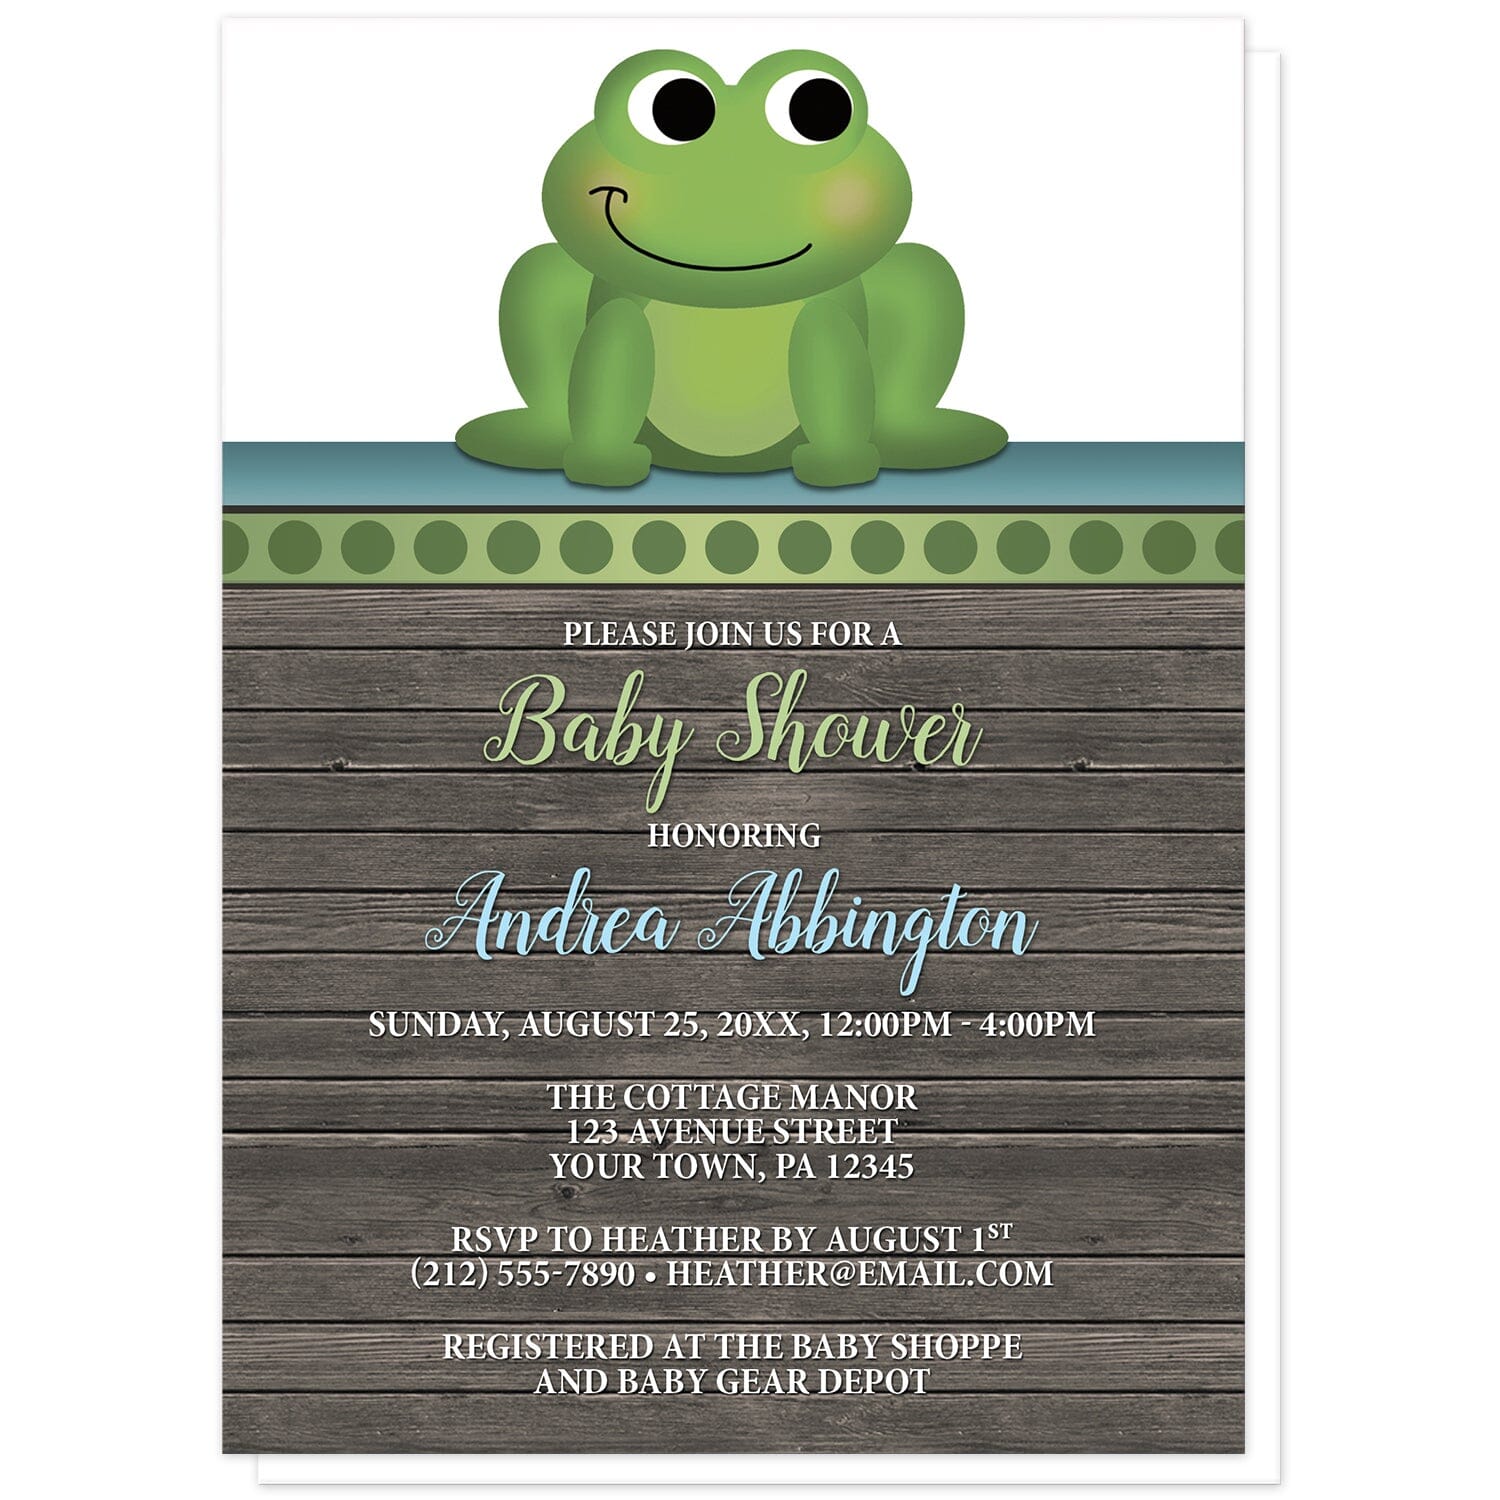 Cute Frog Green Rustic Wood Baby Shower Invitations at Artistically Invited. Cute frog green rustic wood baby shower invitations with an illustration of an adorable green frog on a polka dot green stripe at the top of the invitations. Your personalized baby shower celebration details are custom printed in green, blue, and white over a rustic brown wood background.